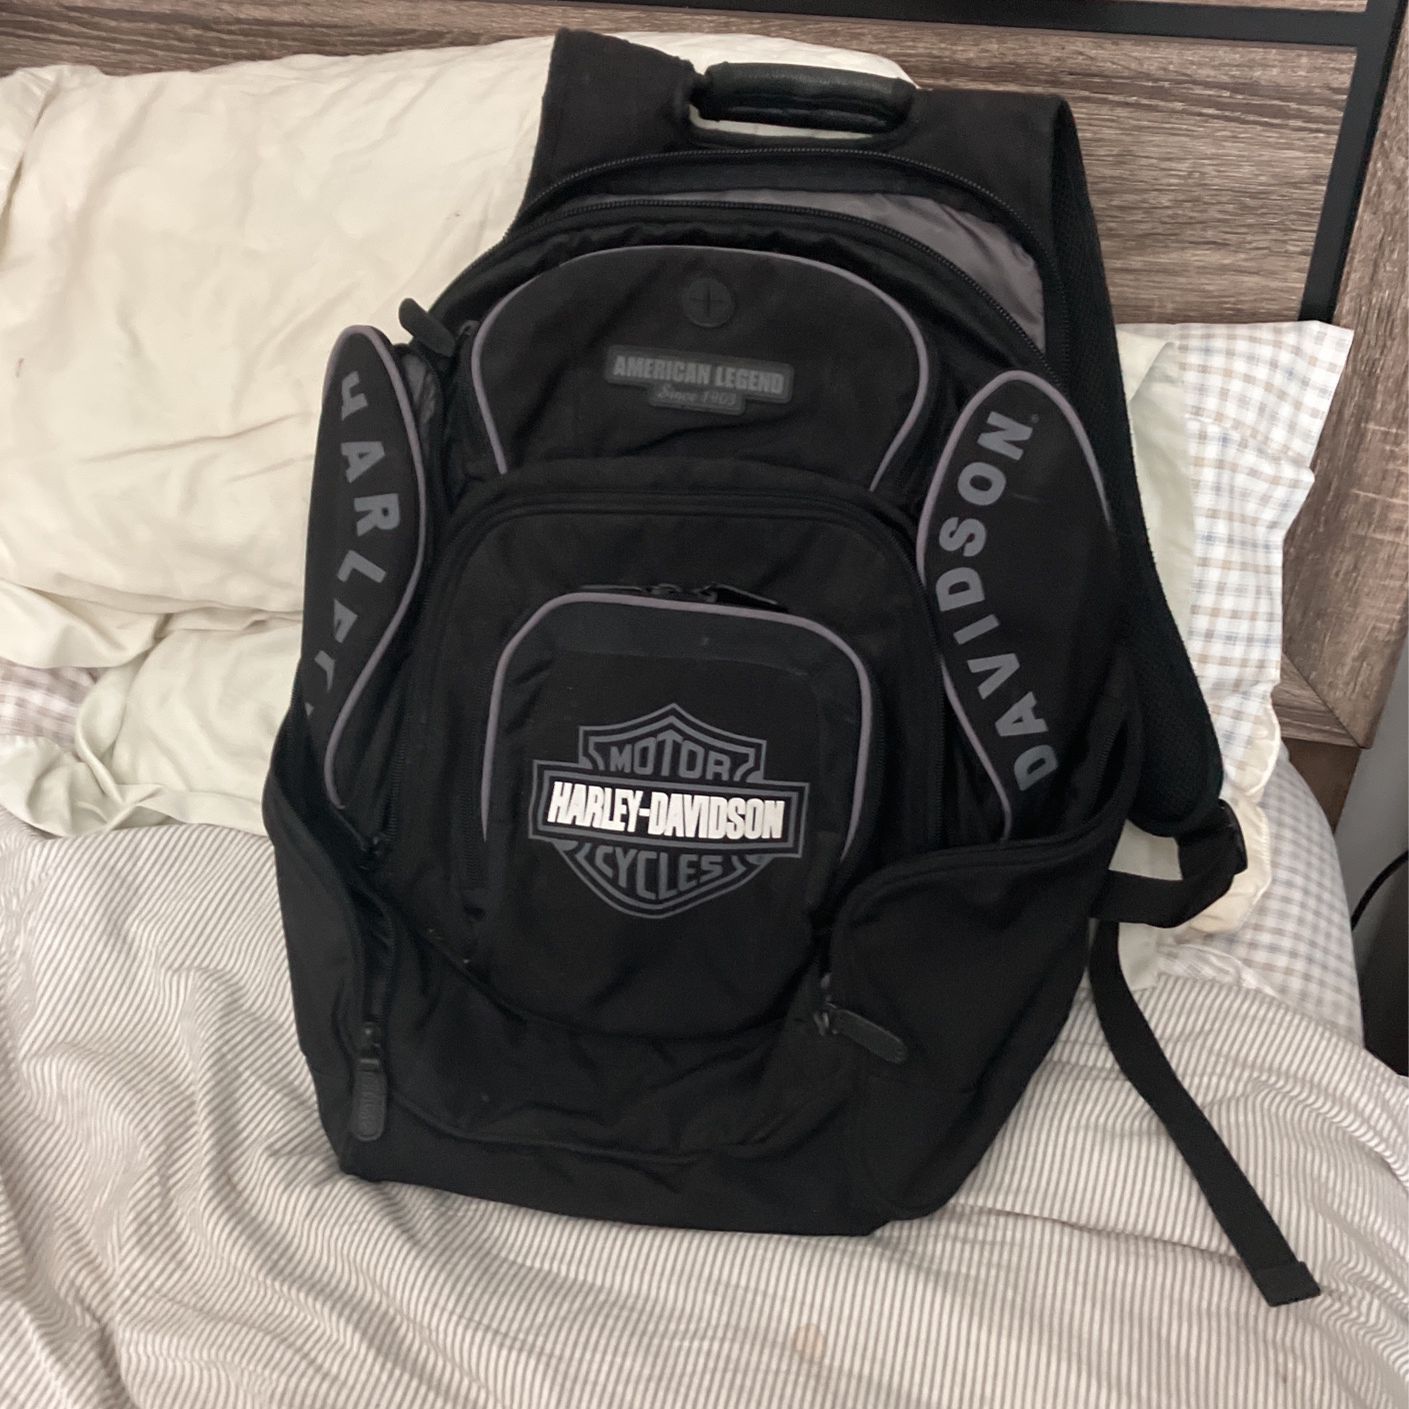 Harley Davidson Backpack Convertable for Sale in Lombard, IL - OfferUp